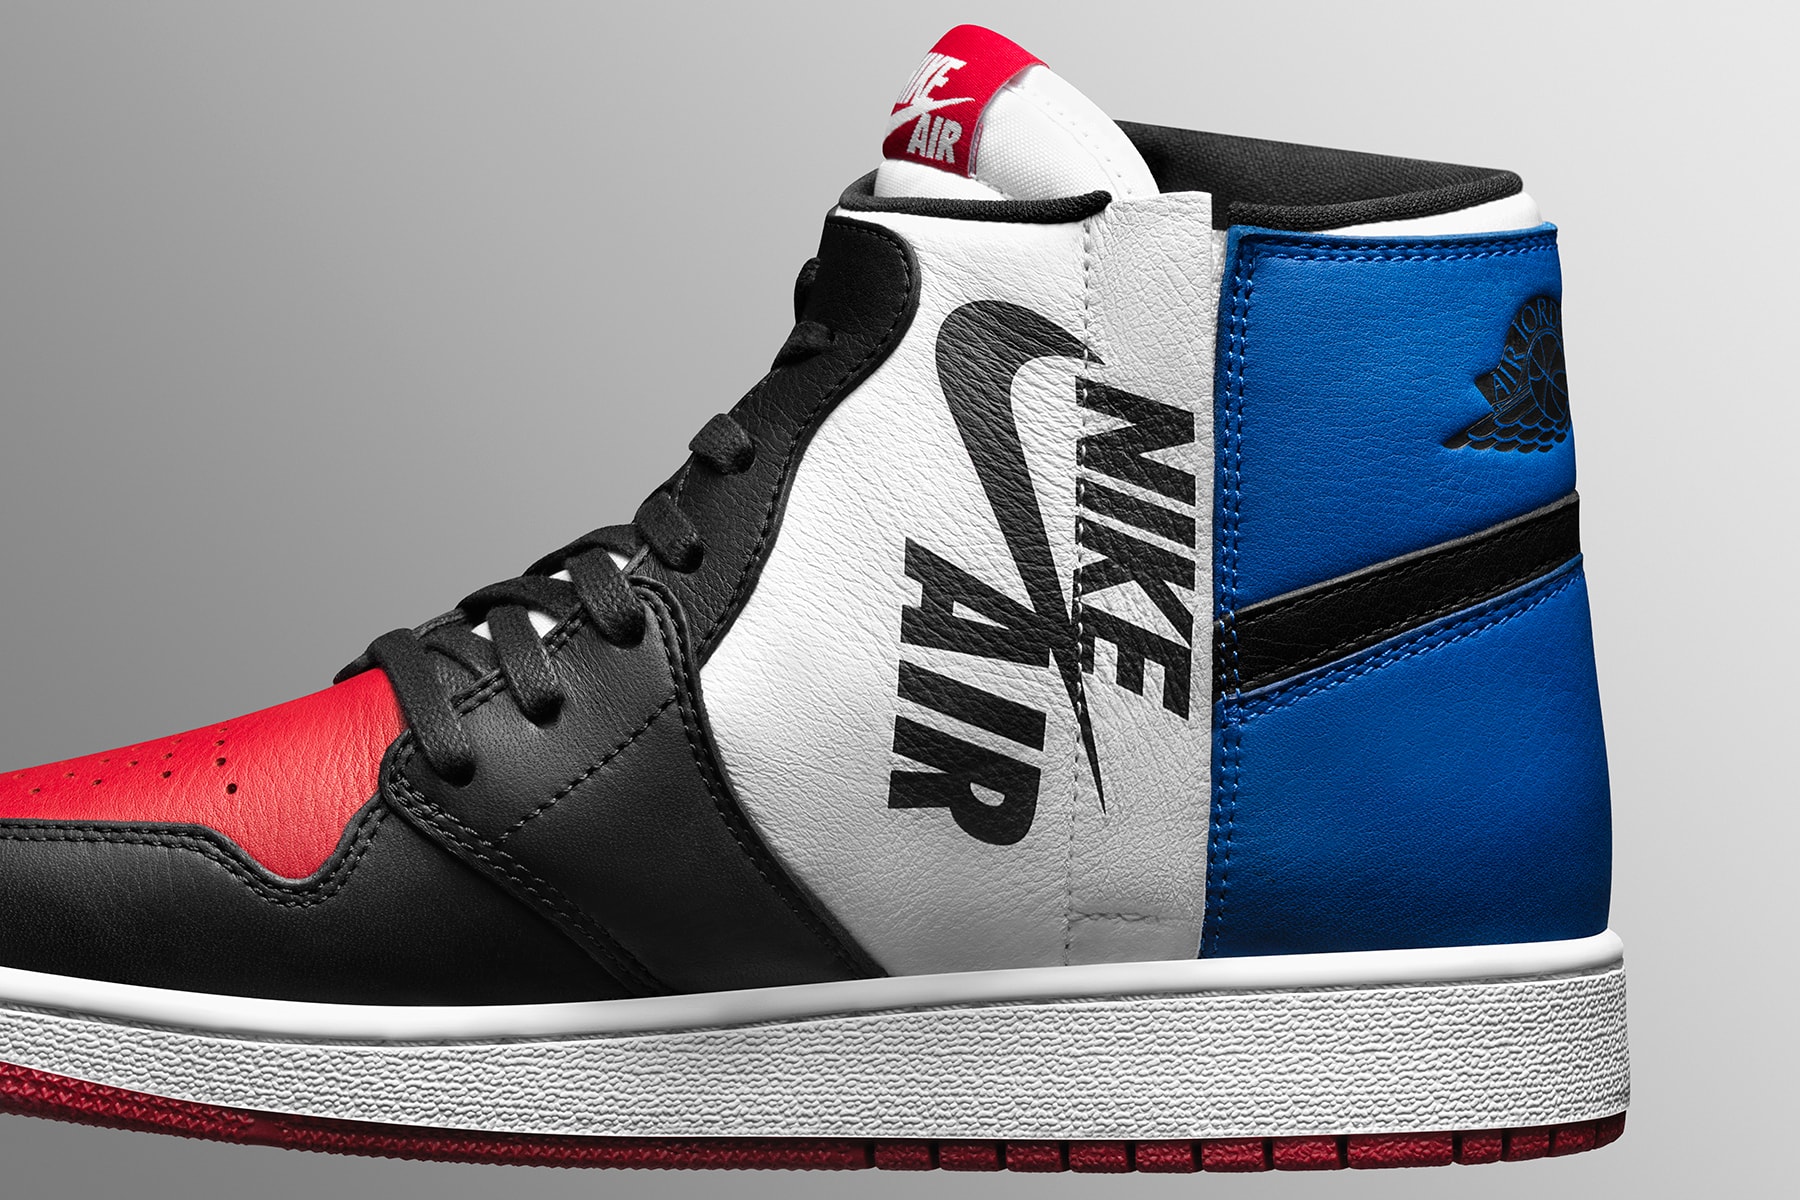 Air Jordan 1 Nike Brand Rebel XX Reimagined Top 3 Bred Royal Chicago Blue Red White Black Release Price Date